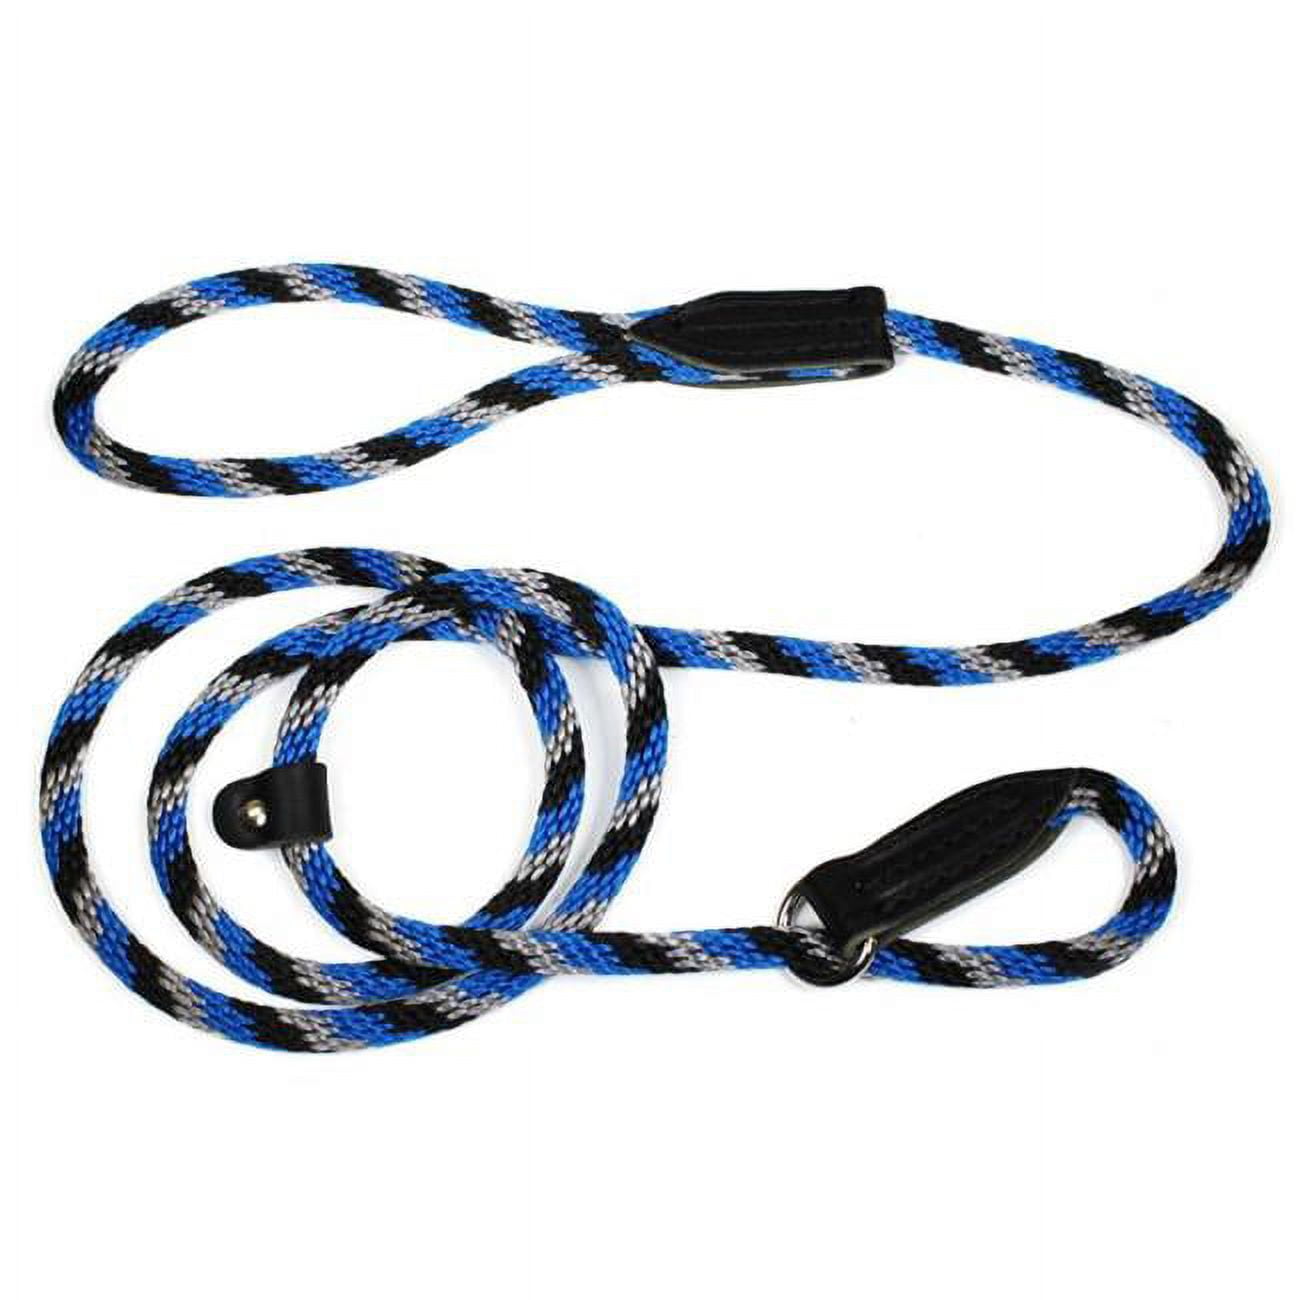 UPC 024764604977 product image for Leather Brothers 3604-59 6 ft. British Slip Loop Rope Leads for Dogs - Pack of 3 | upcitemdb.com